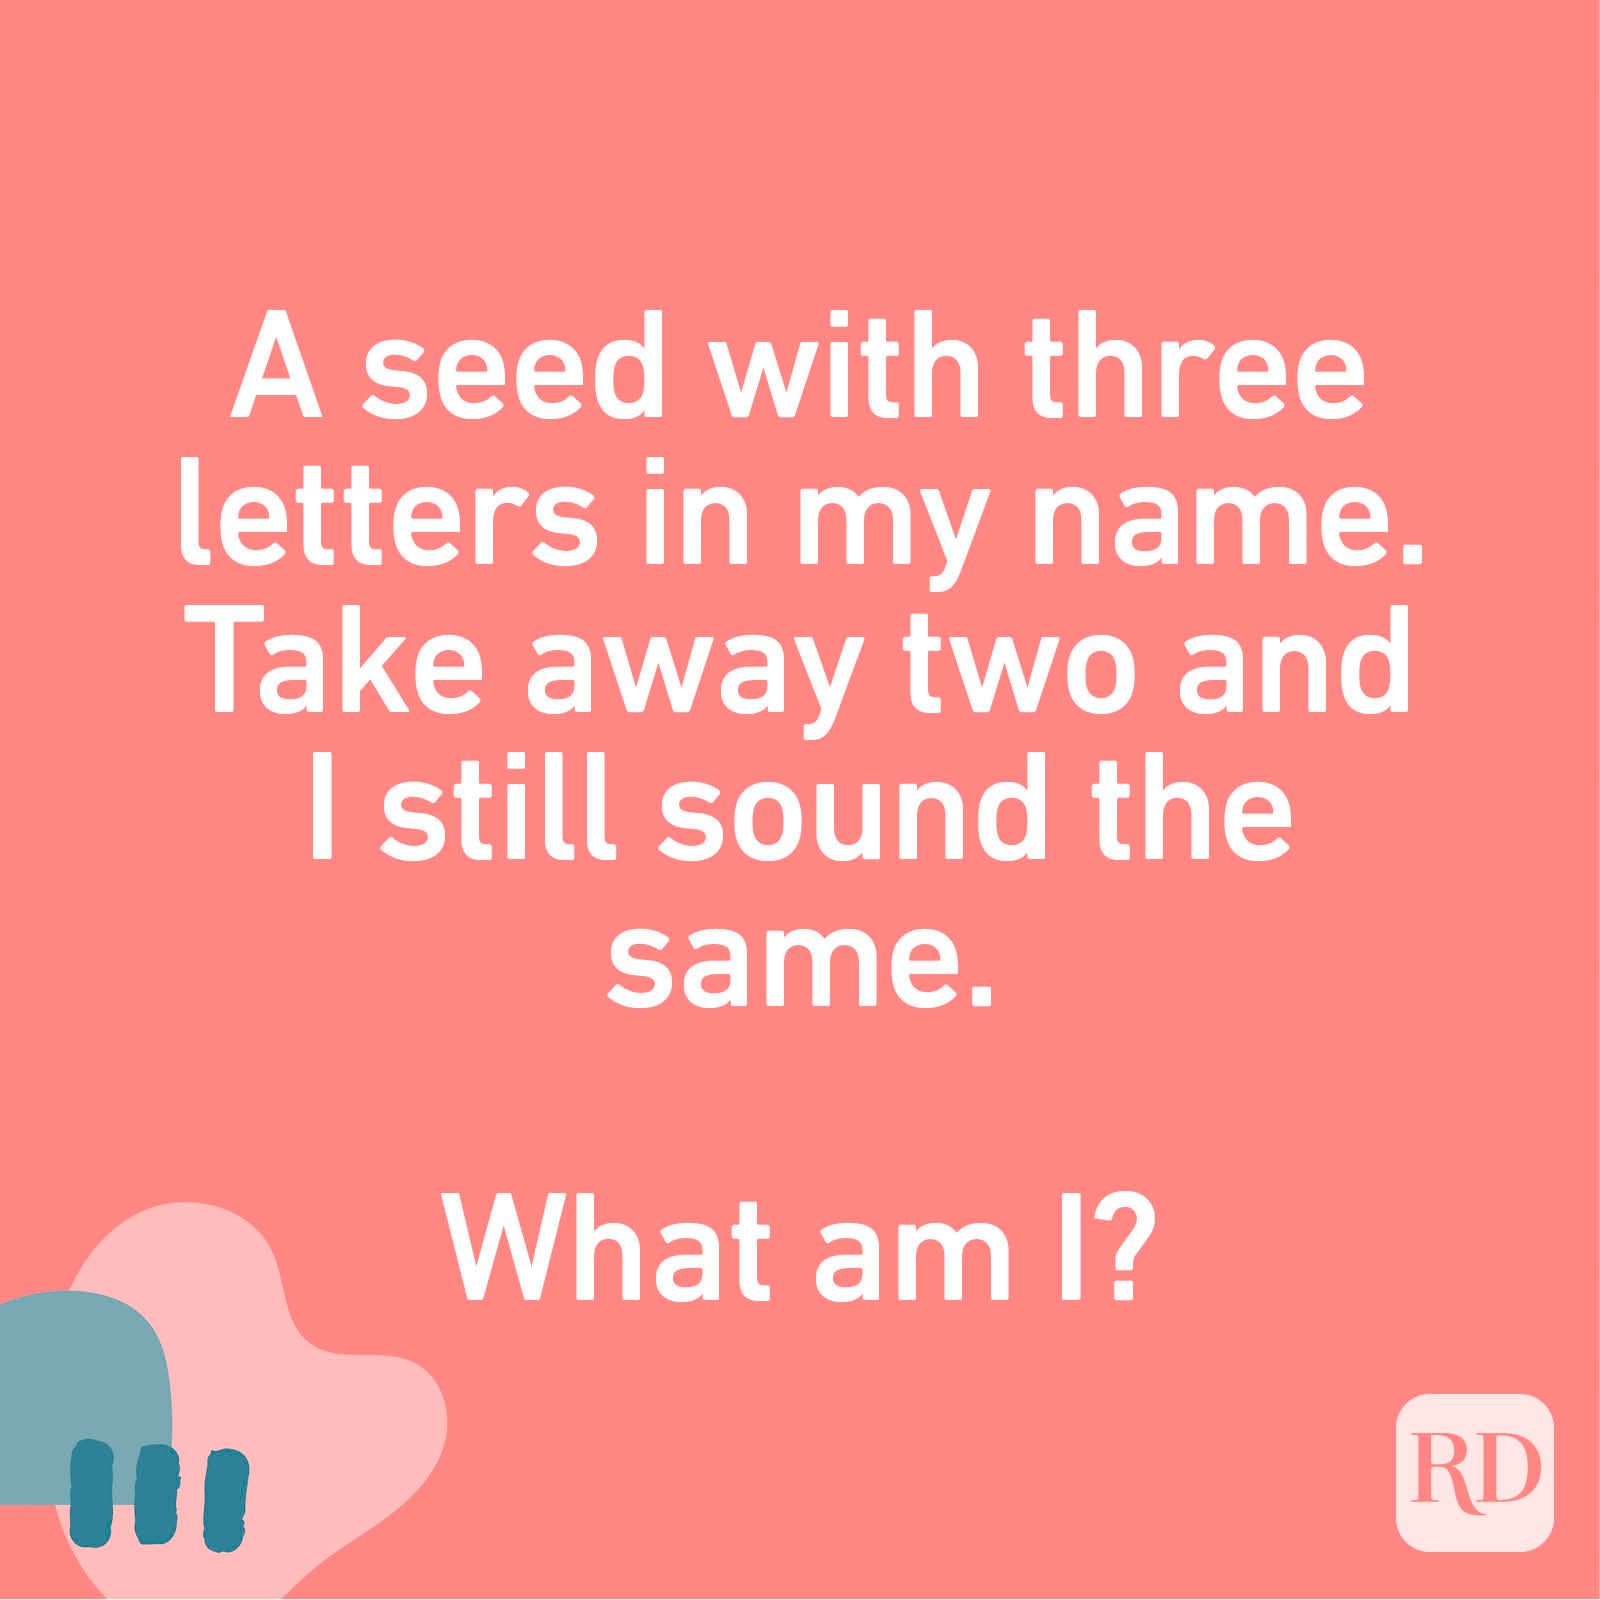 A seed with three letters in my name. Take away two and I still sound the same. What am I?